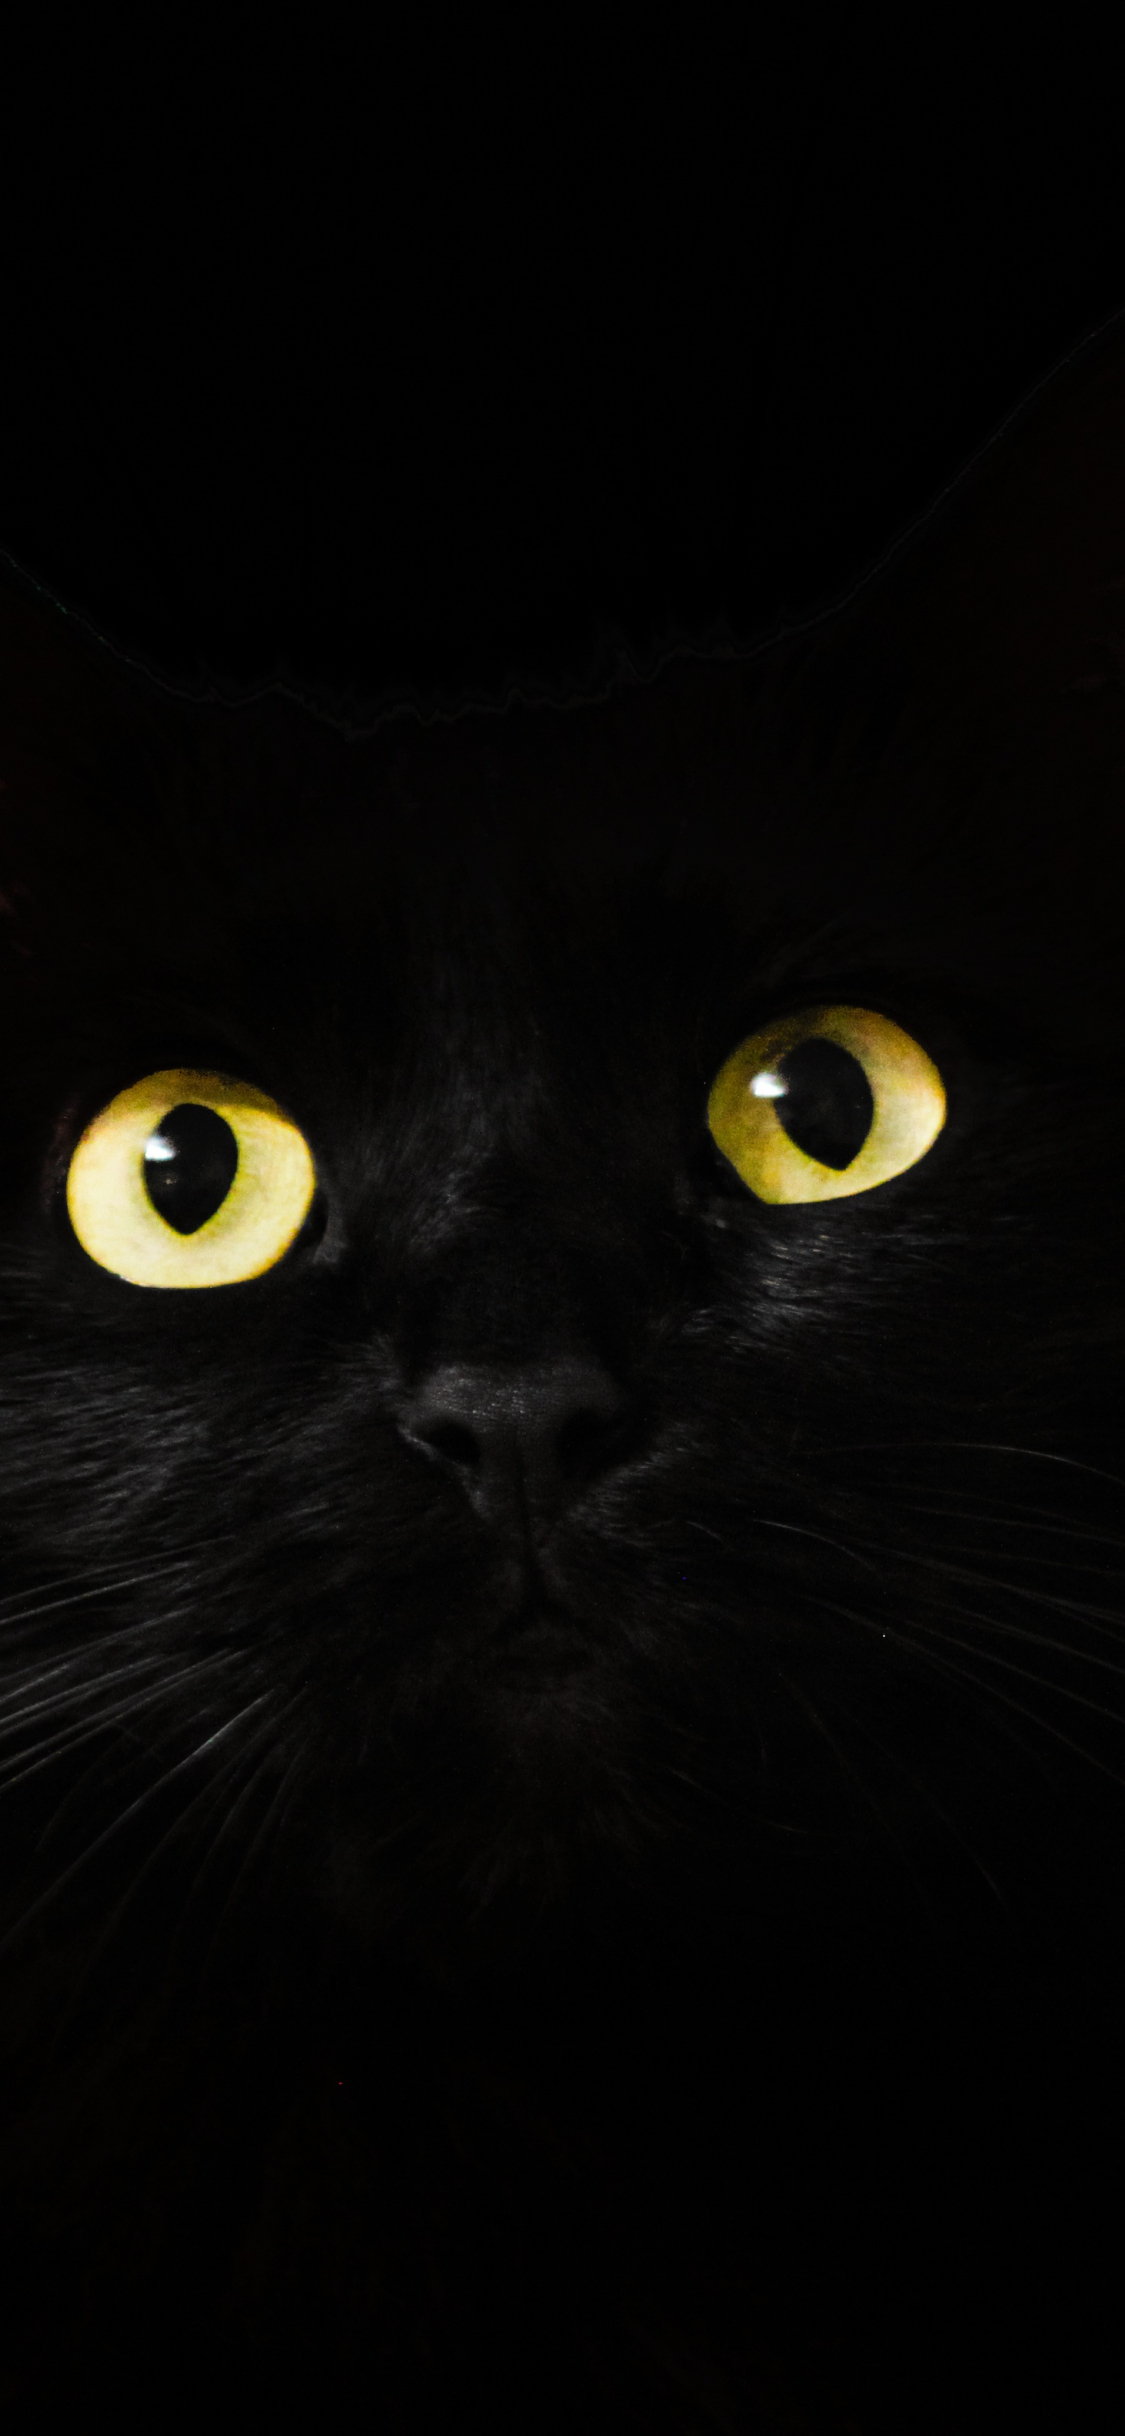 Download 1125x2436 Wallpaper Black Cat Muzzle Animal Yellow Eyes Iphone X 1125x2436 Hd Image Background 922